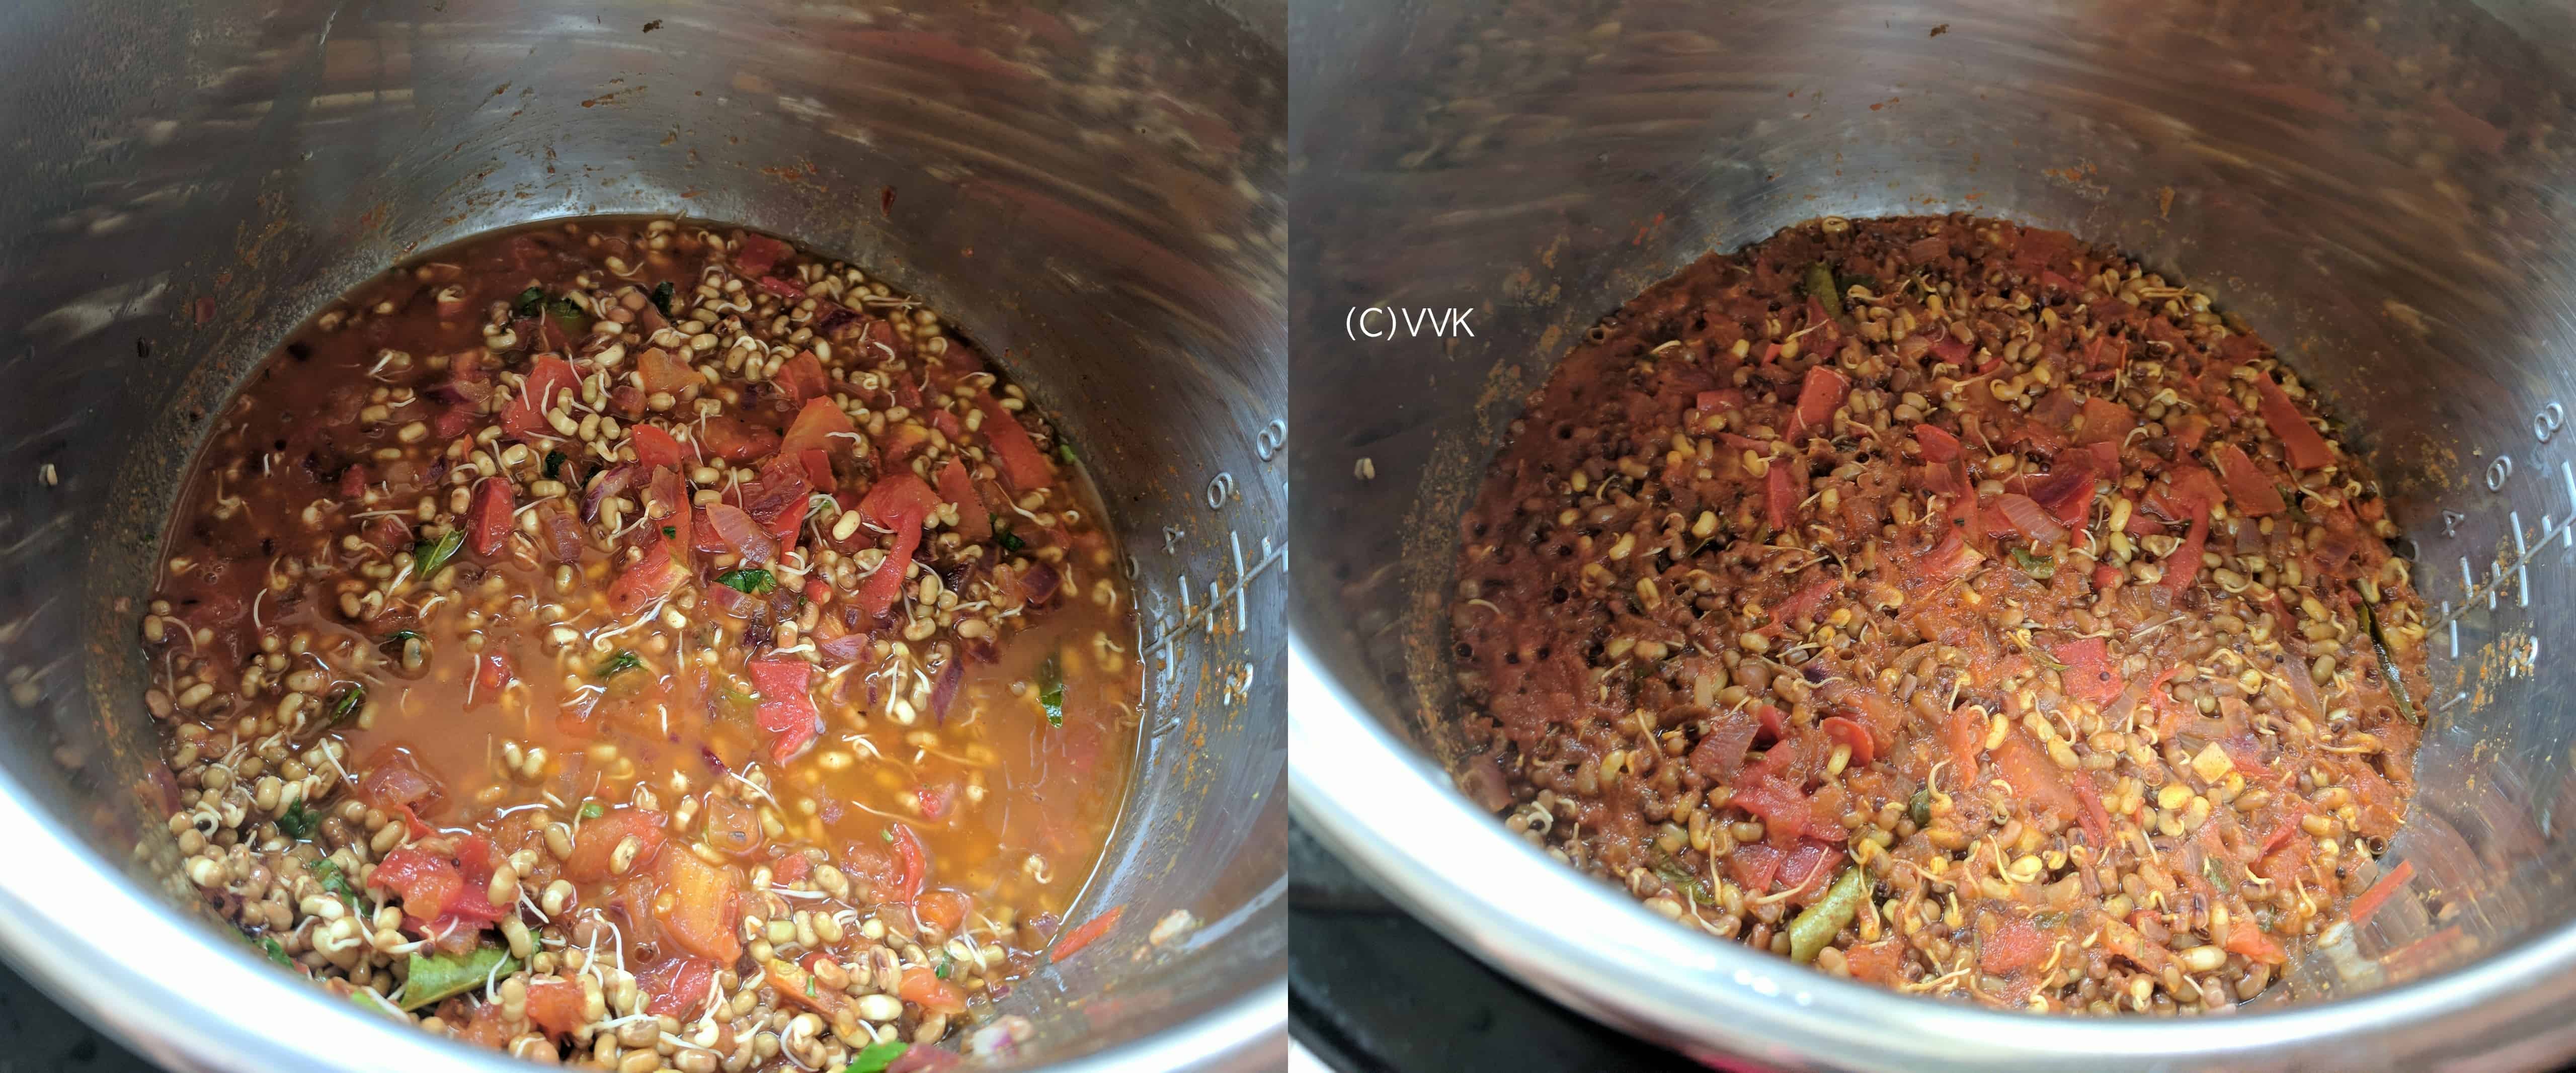 Instant Pot Matki Usal - Matki Chi Usal Steps Shown in Two Images